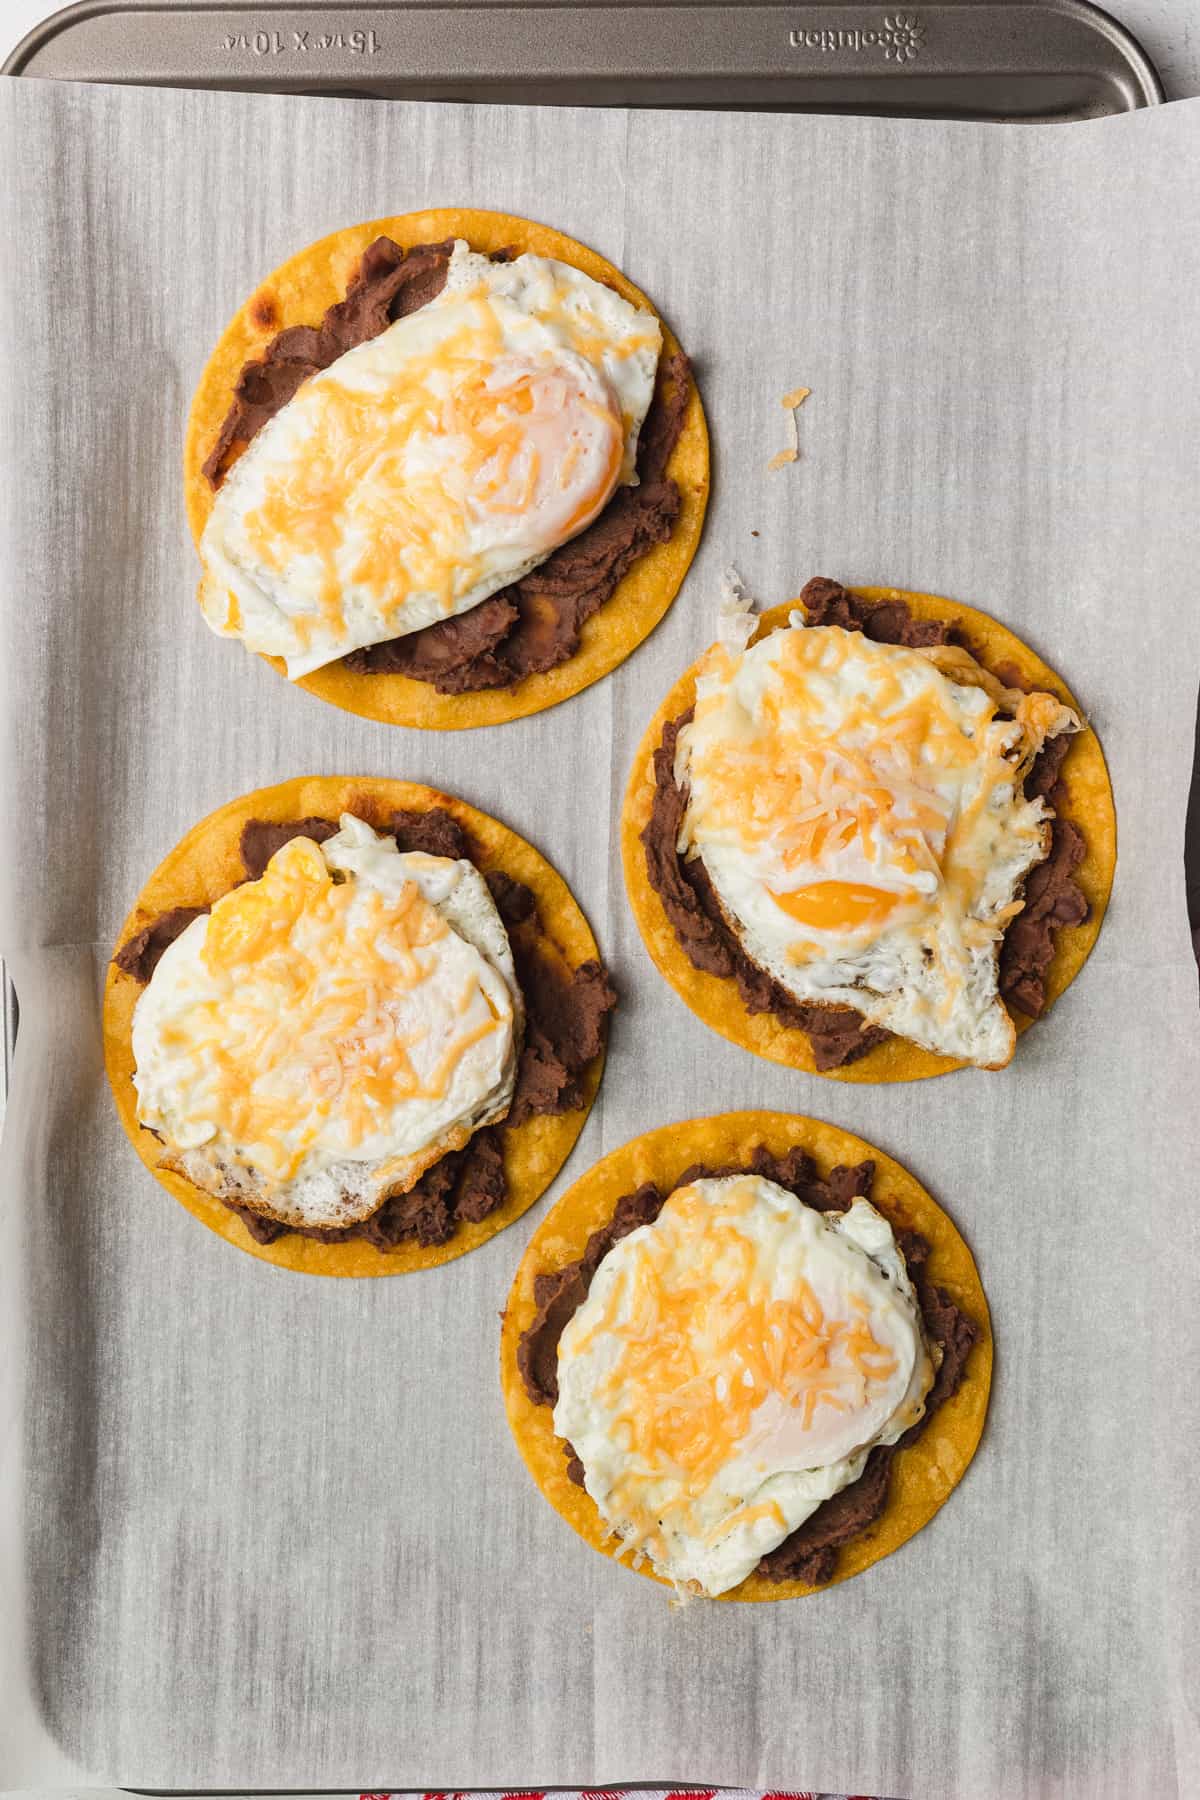 Eggs placed on refried beans and tortillas